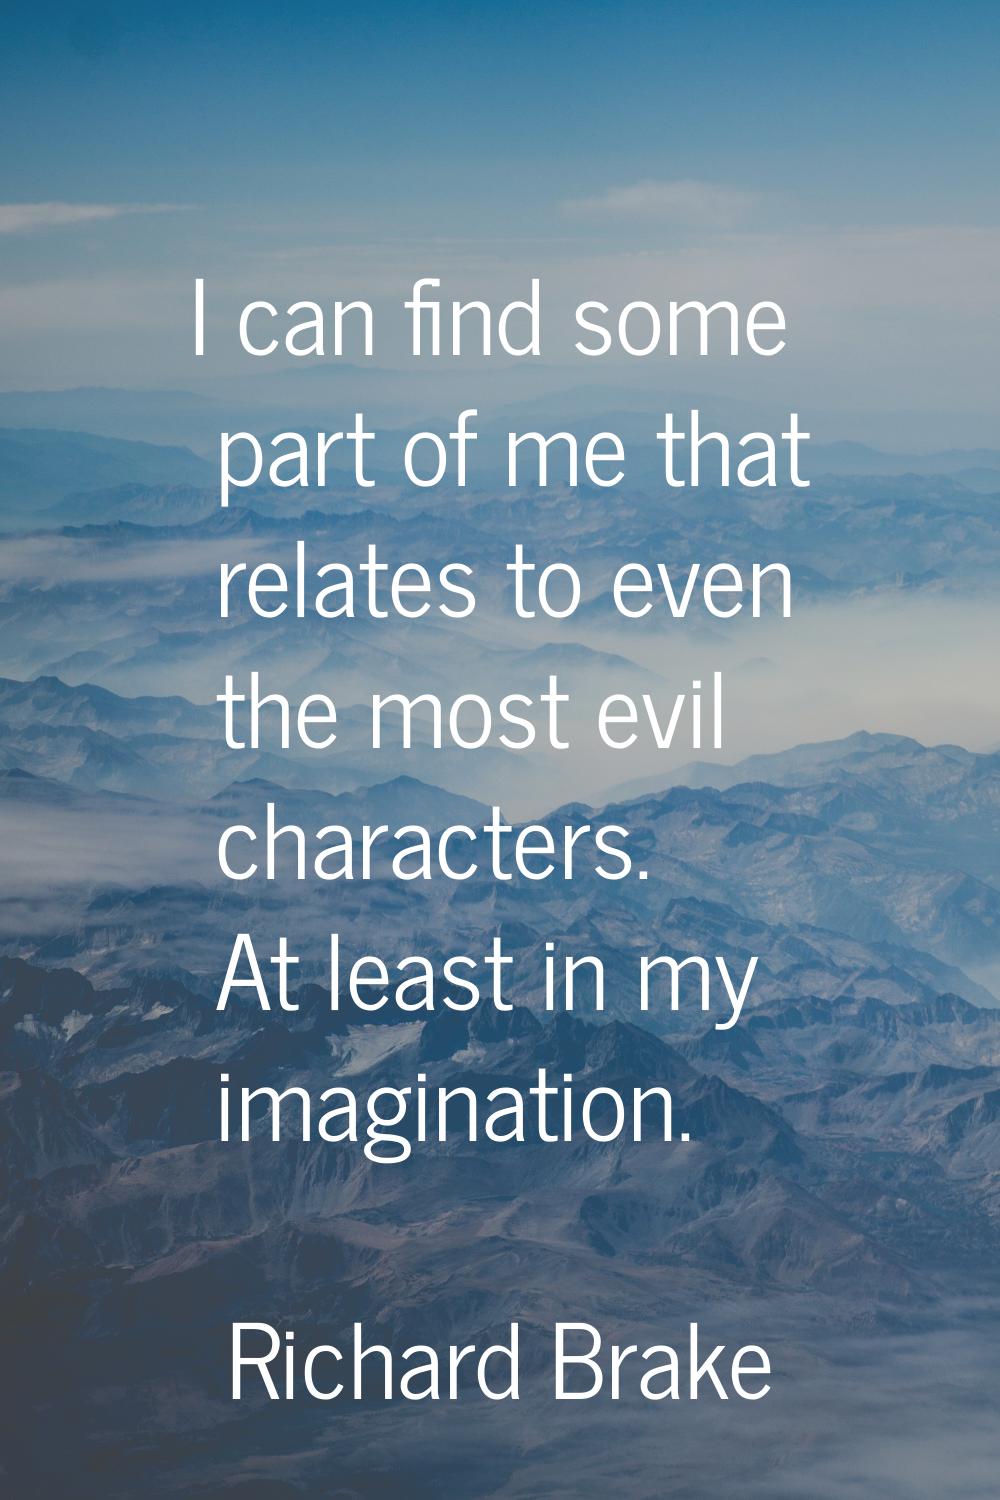 I can find some part of me that relates to even the most evil characters. At least in my imaginatio